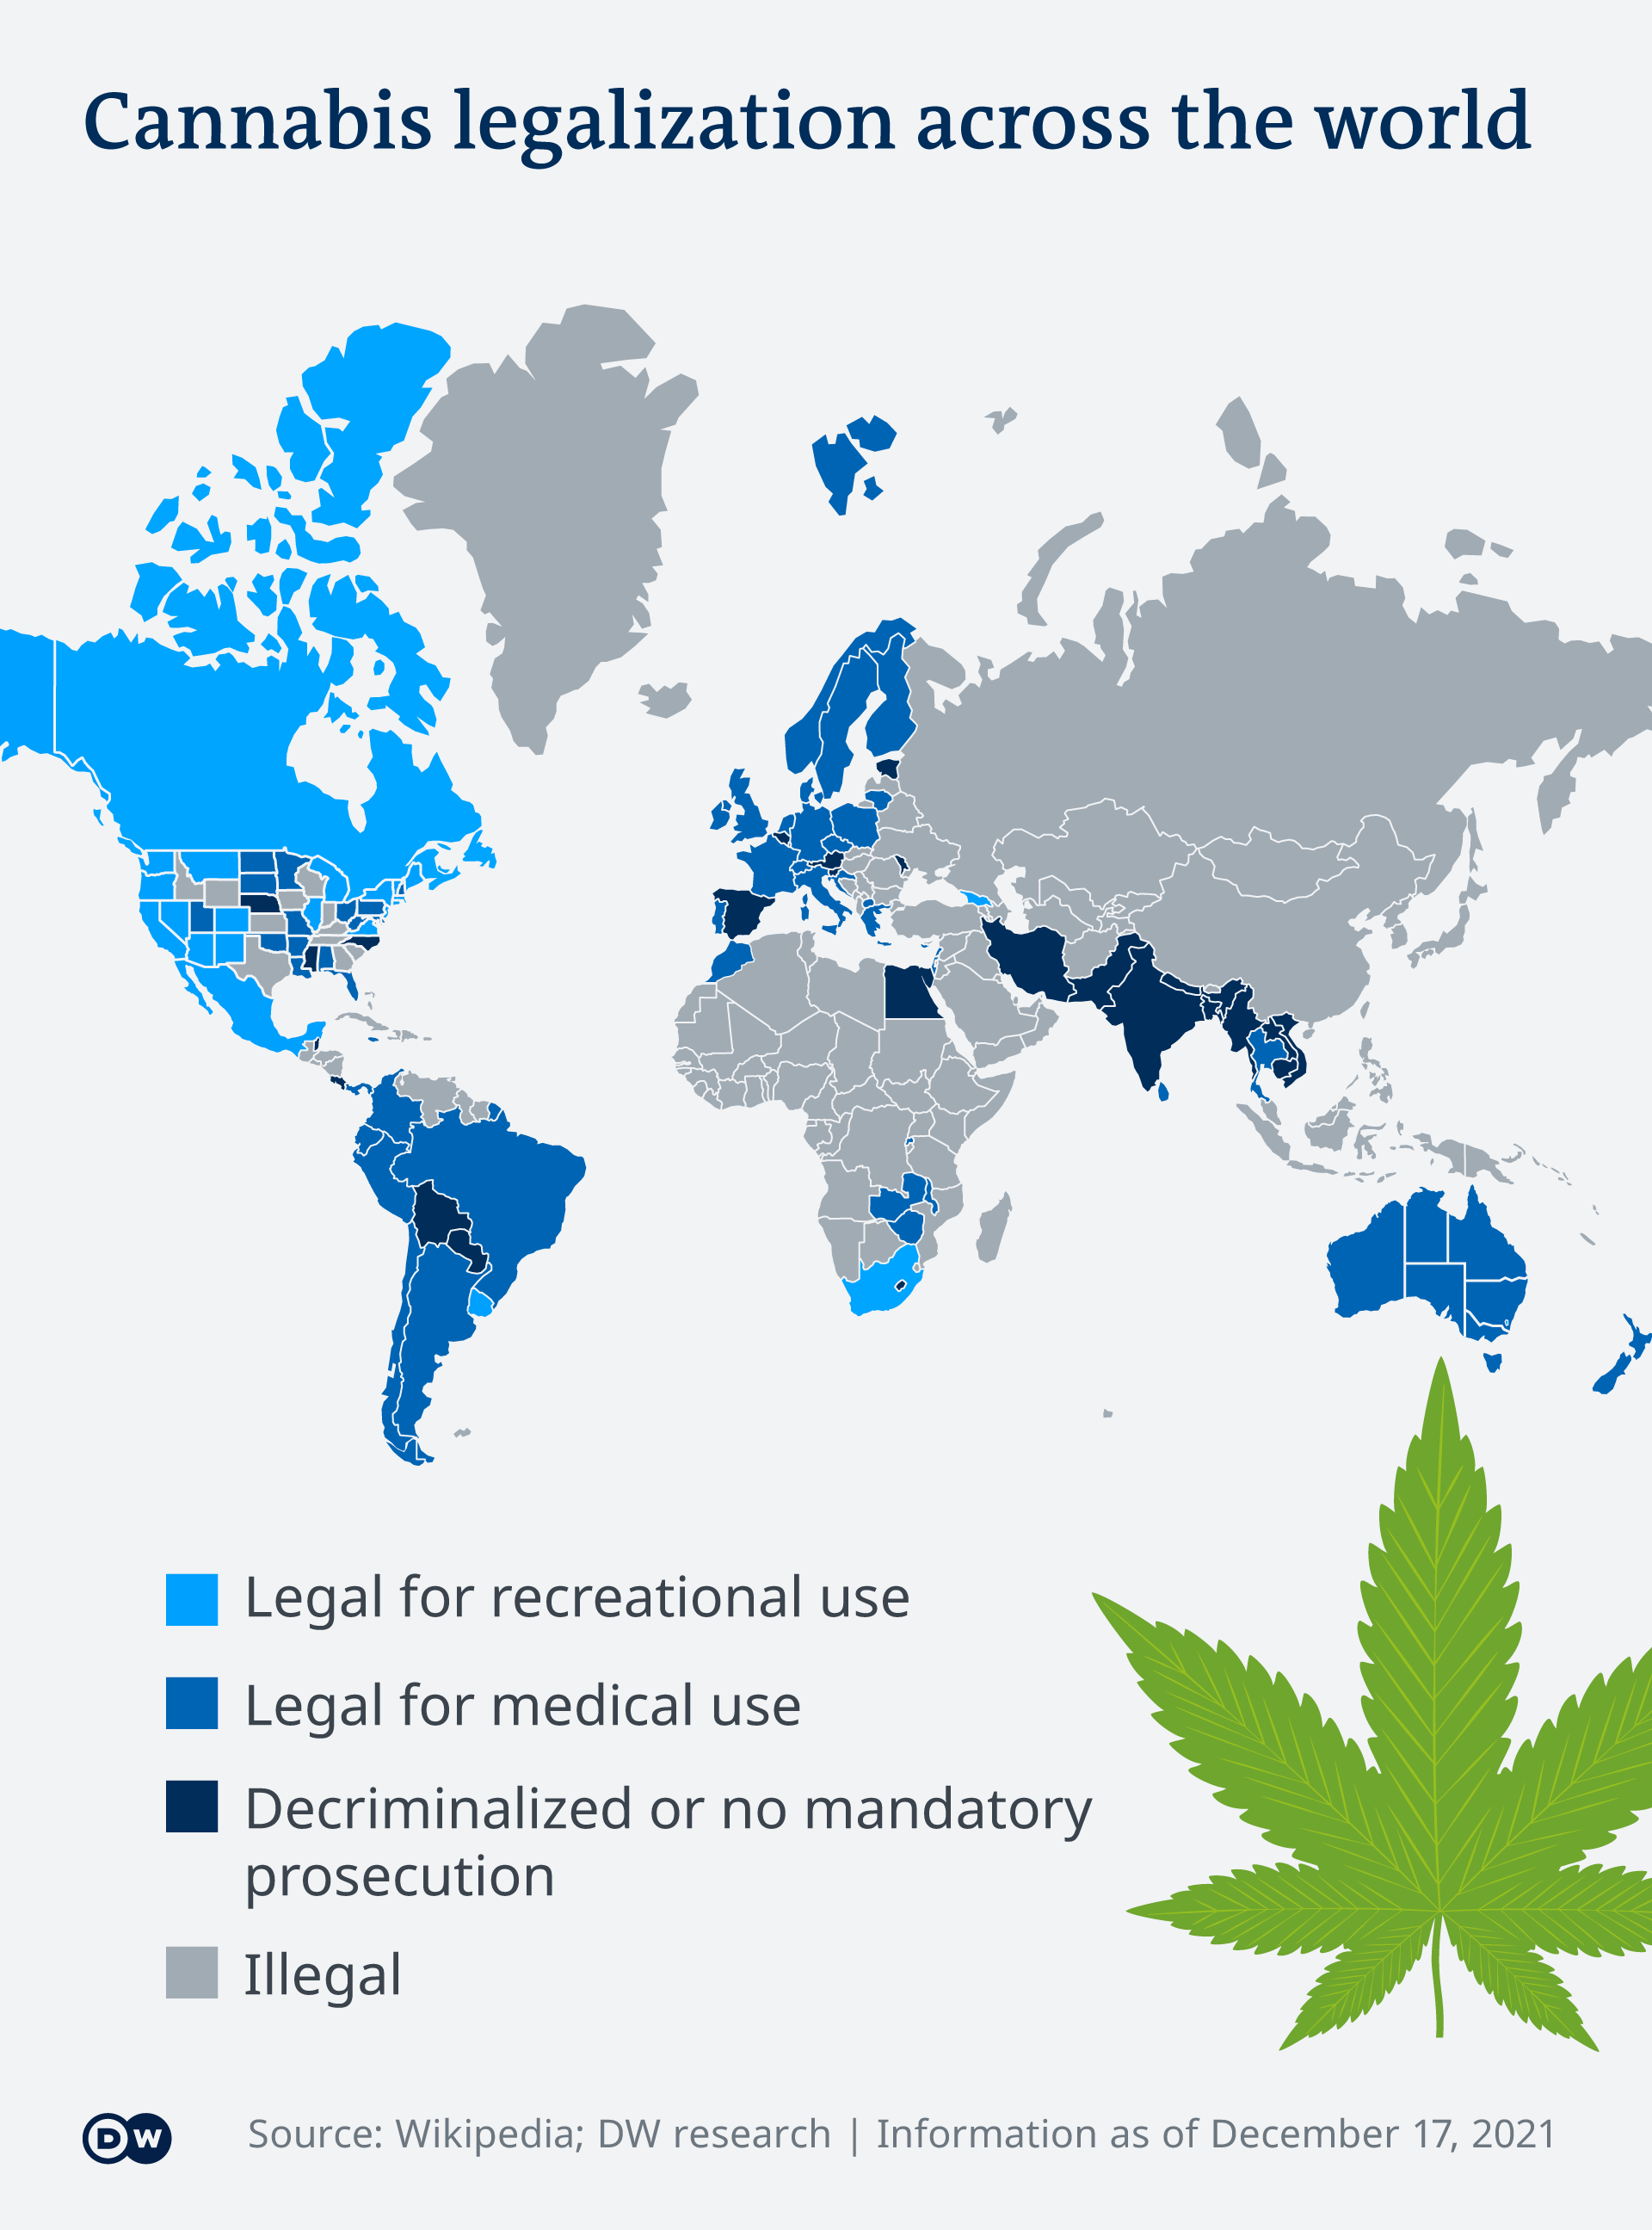 Infografik showing the status of cannabis legalization across the world